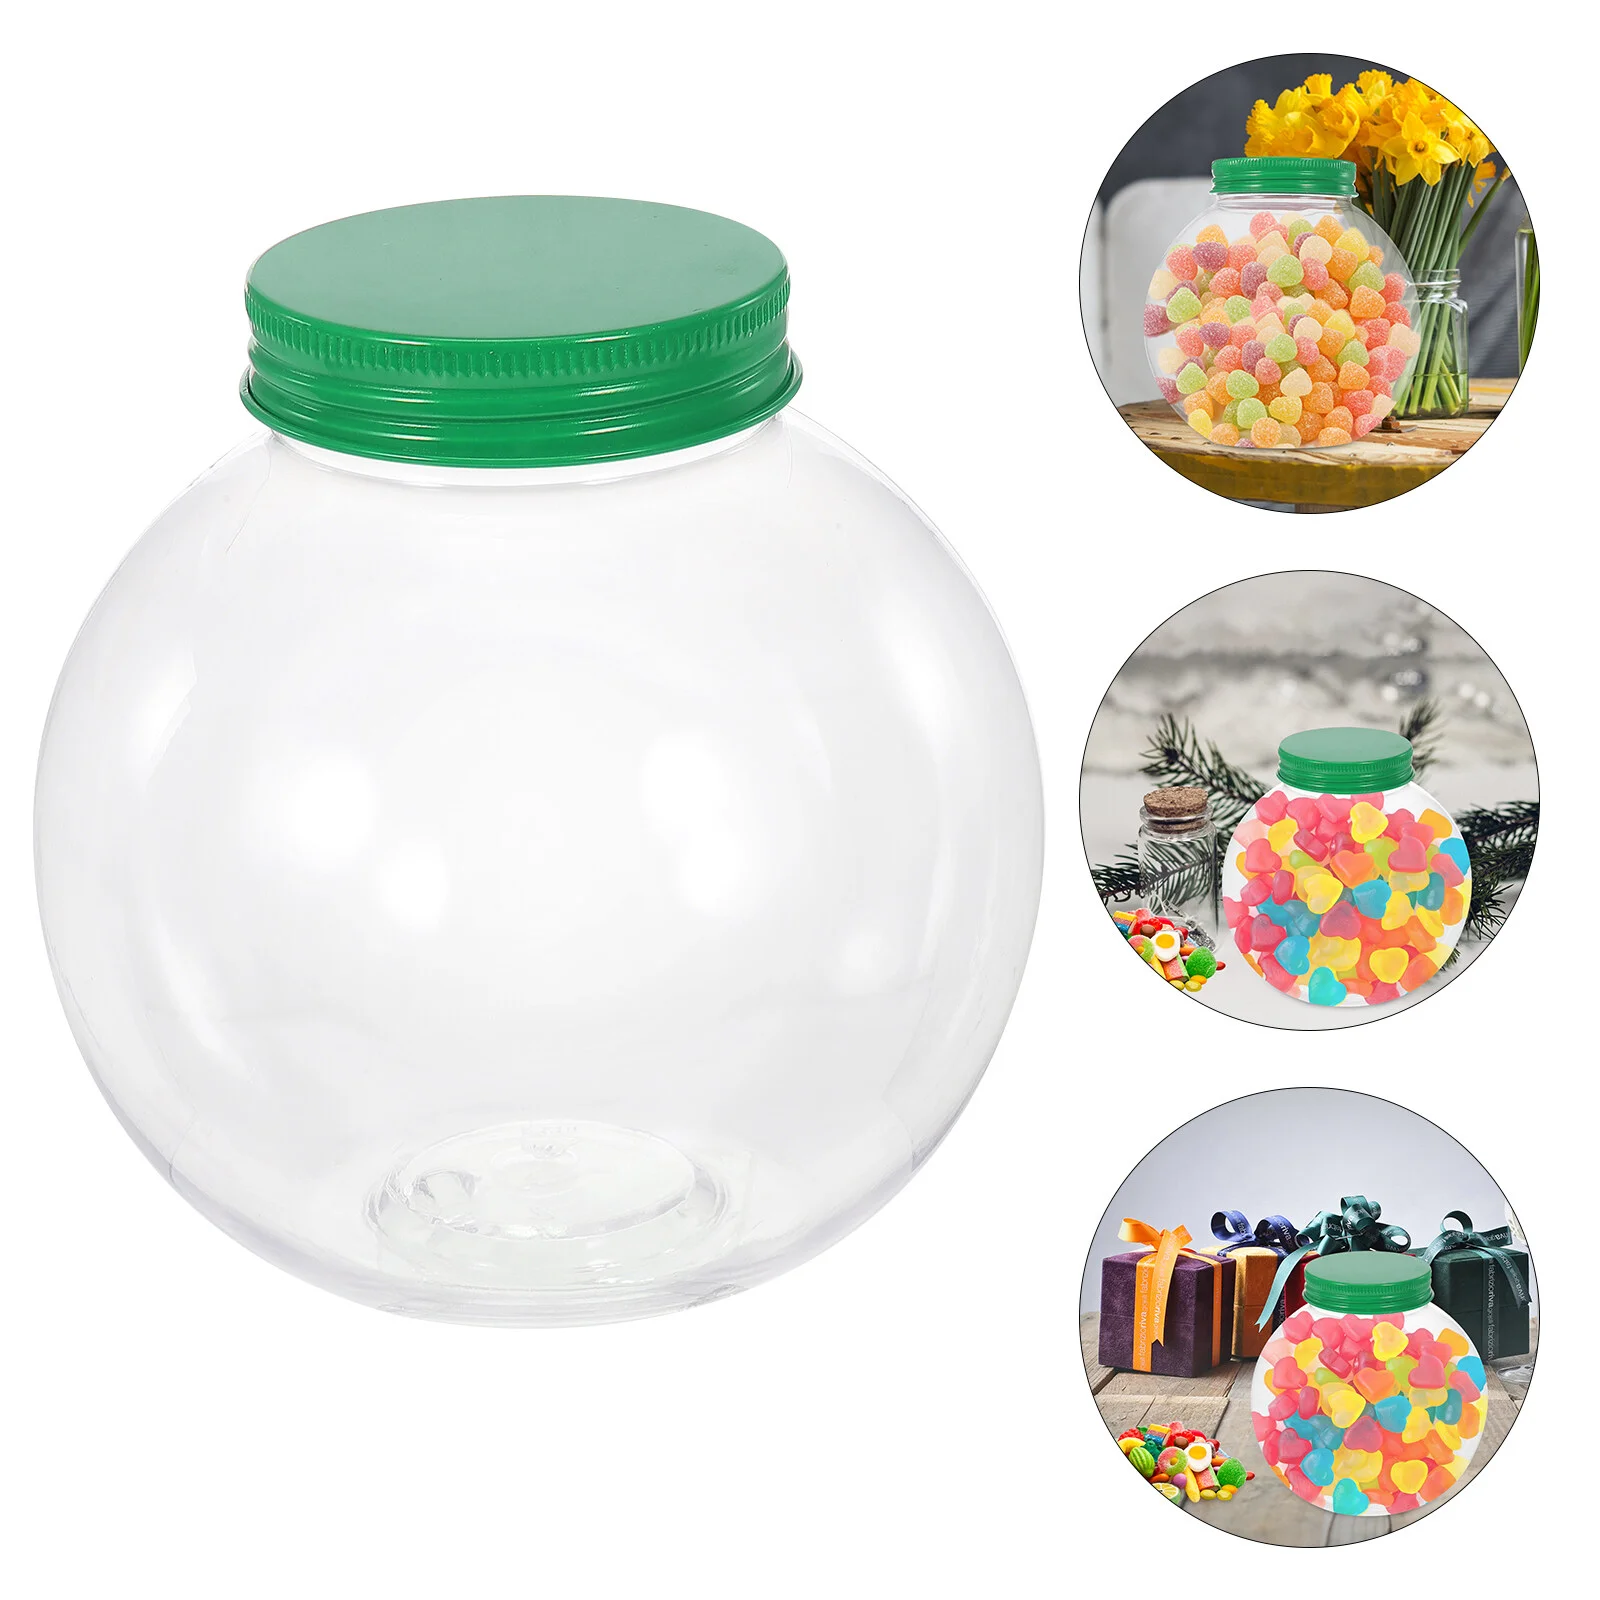 

Box Candy Christmas Gift Jar Party Container Treat Jars Plastic Favor Decorative Cookie Clear Bottle Lid Xmas Goodie Snack